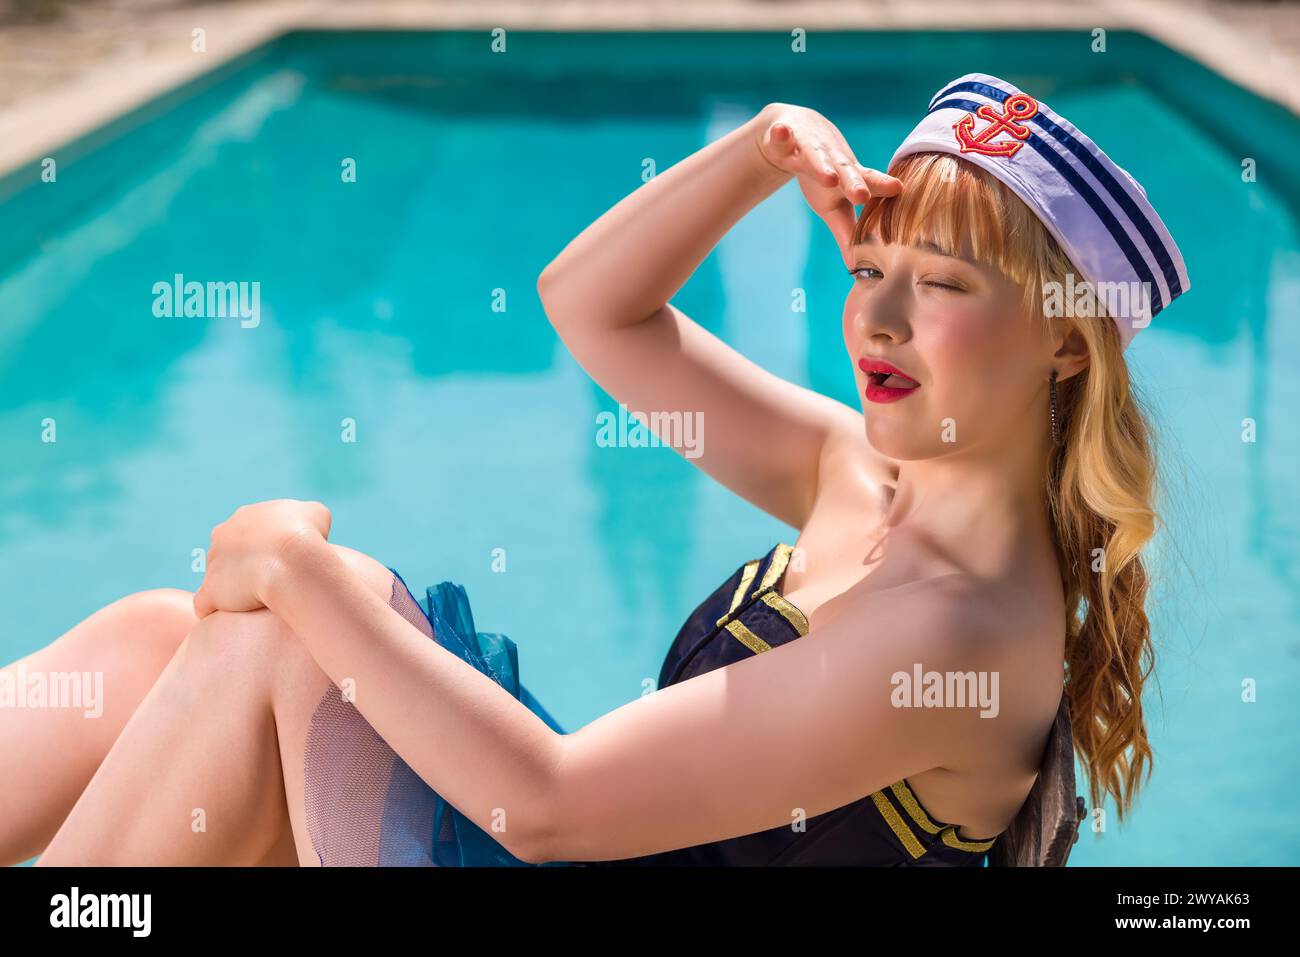 Attractive young woman dressed in a sexy sailor costume as a pinup girl on the edge of a swimming pool Stock Photo